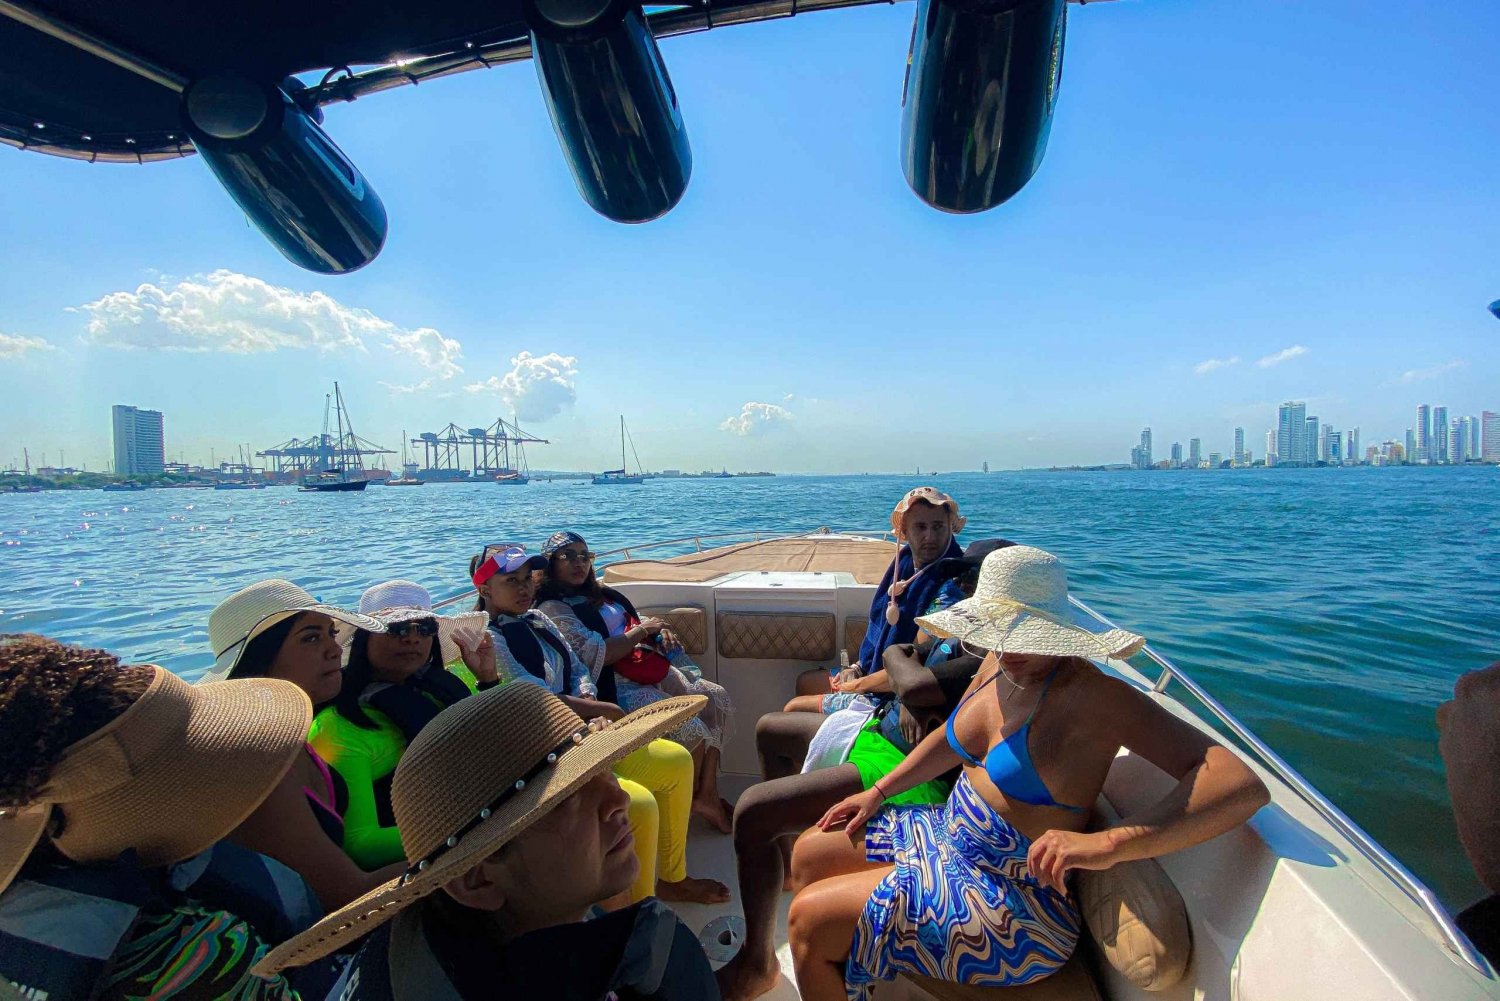 Cartagena: 5 Rosario Islands Tour with Snorkeling and Lunch